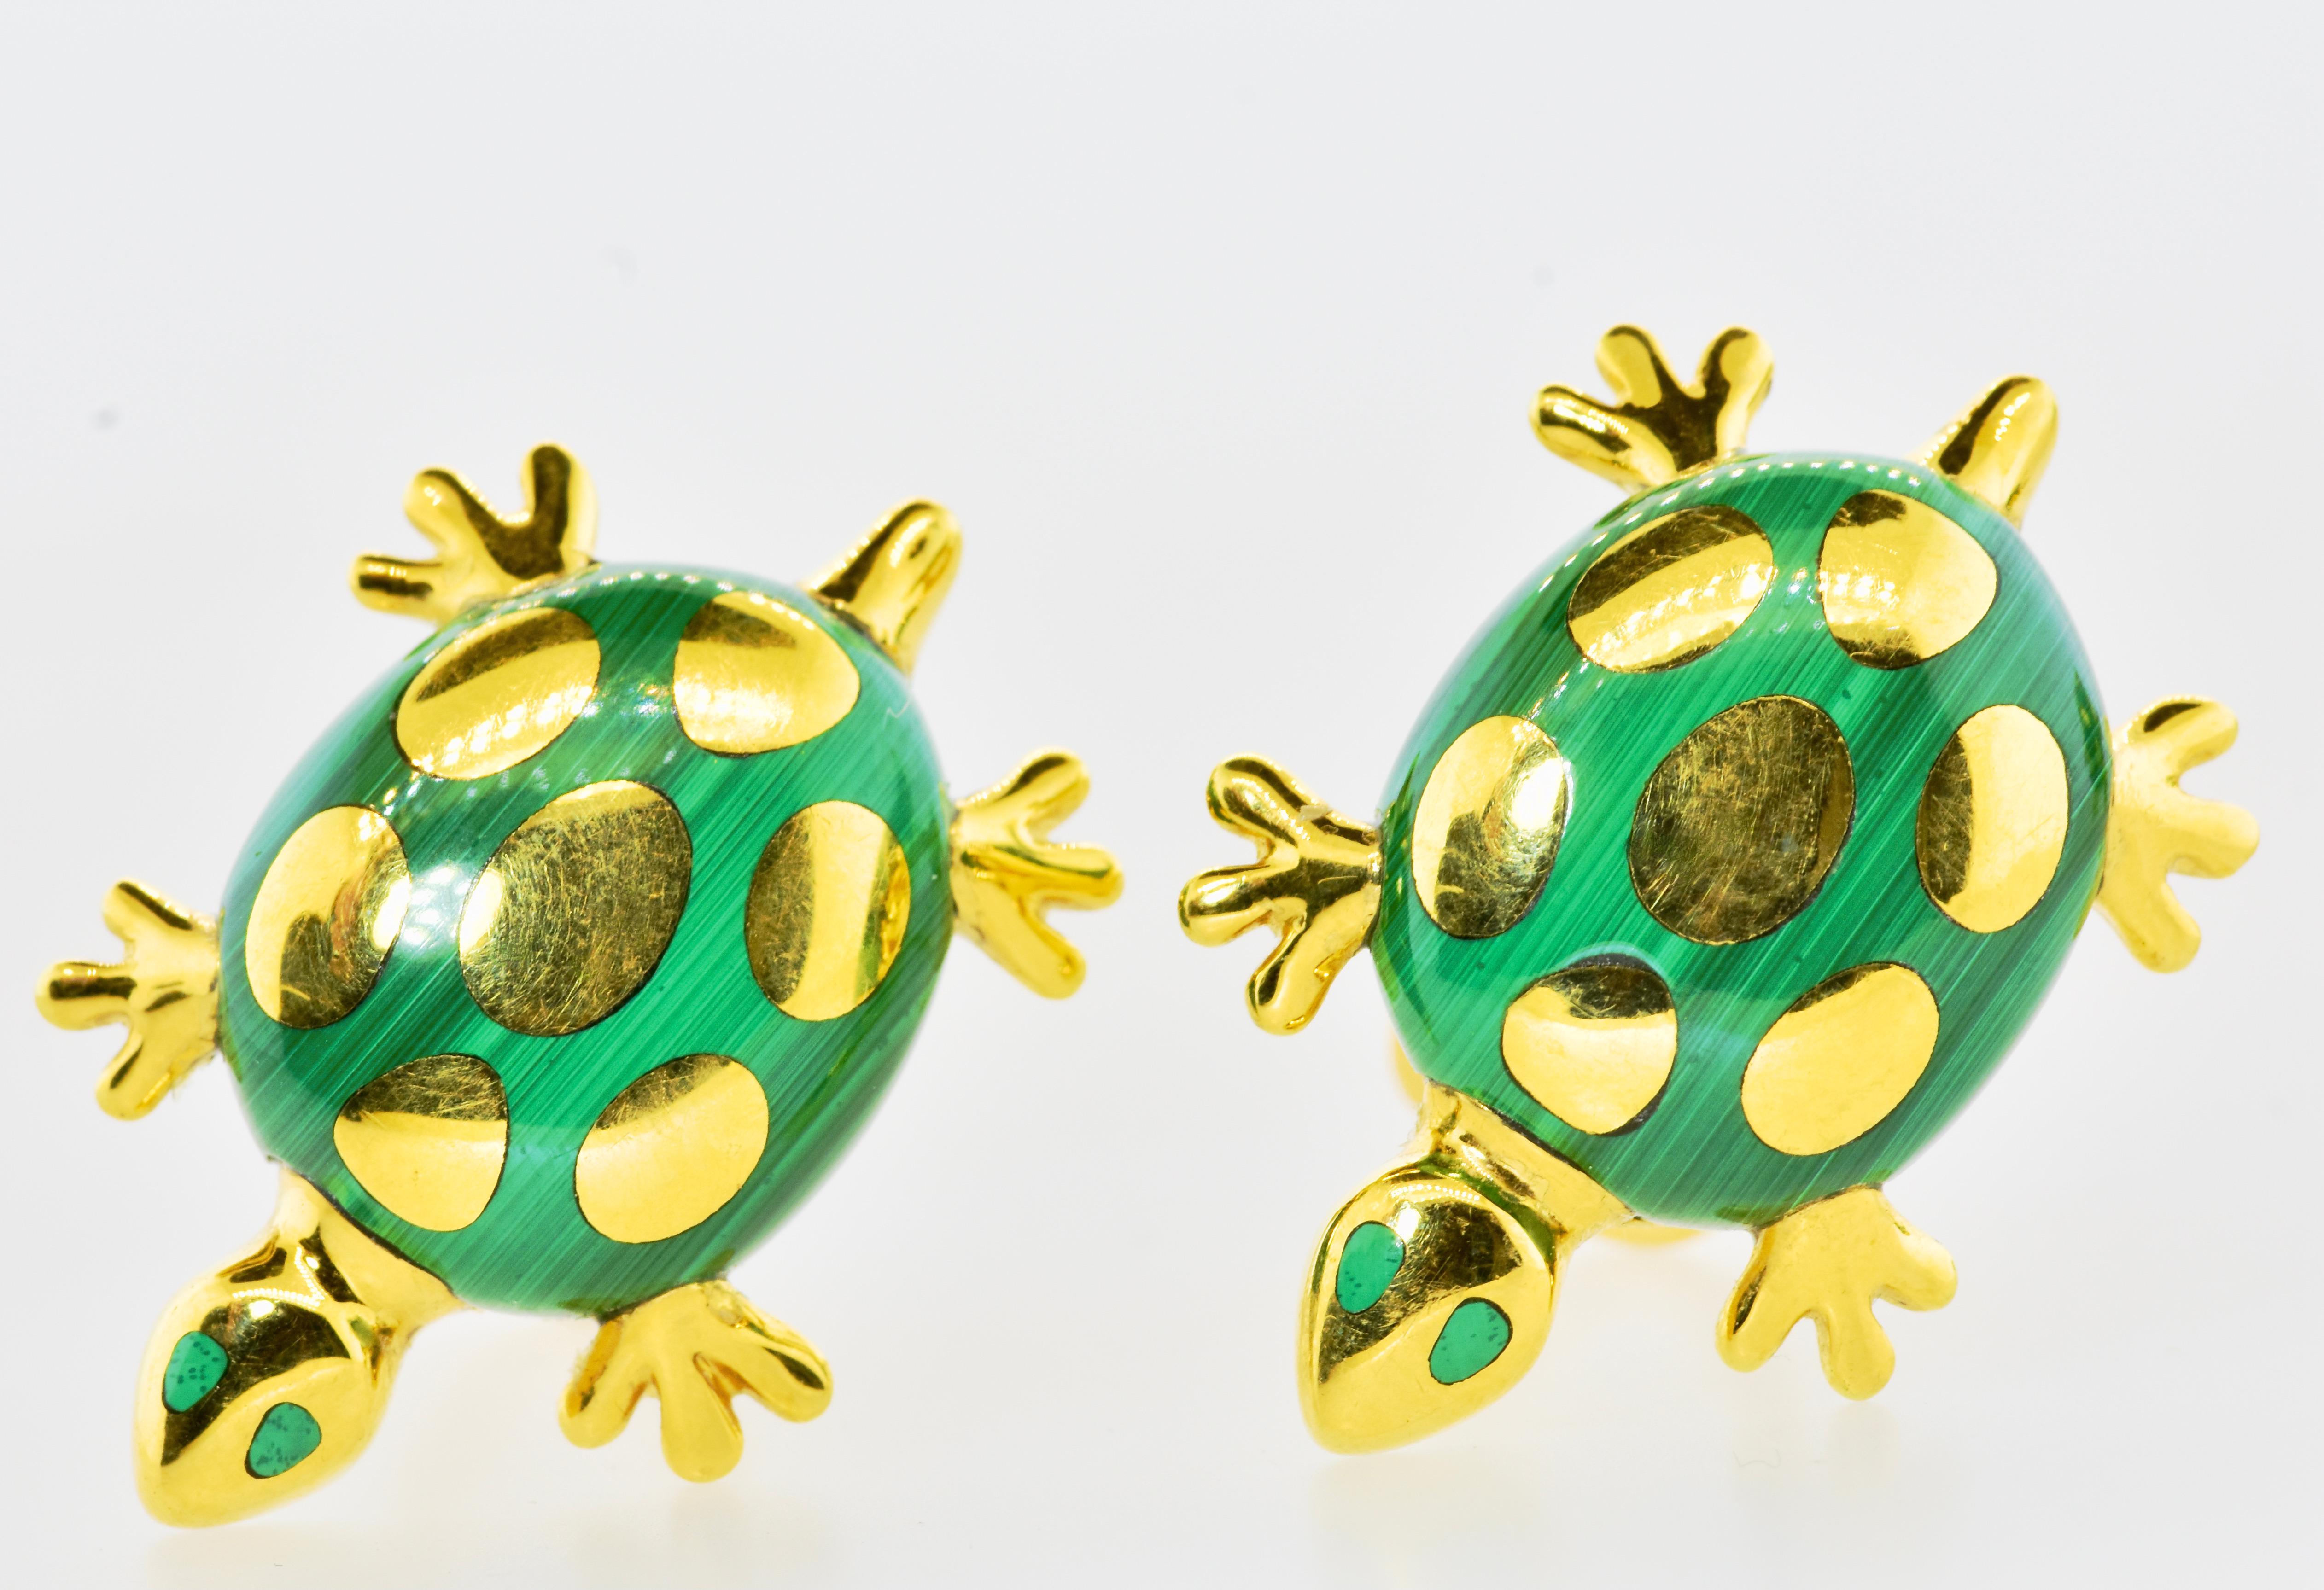 Cabochon Tiffany & Co. 18K Yellow Gold and Malachite Earring and Brooch Set, c. 1996